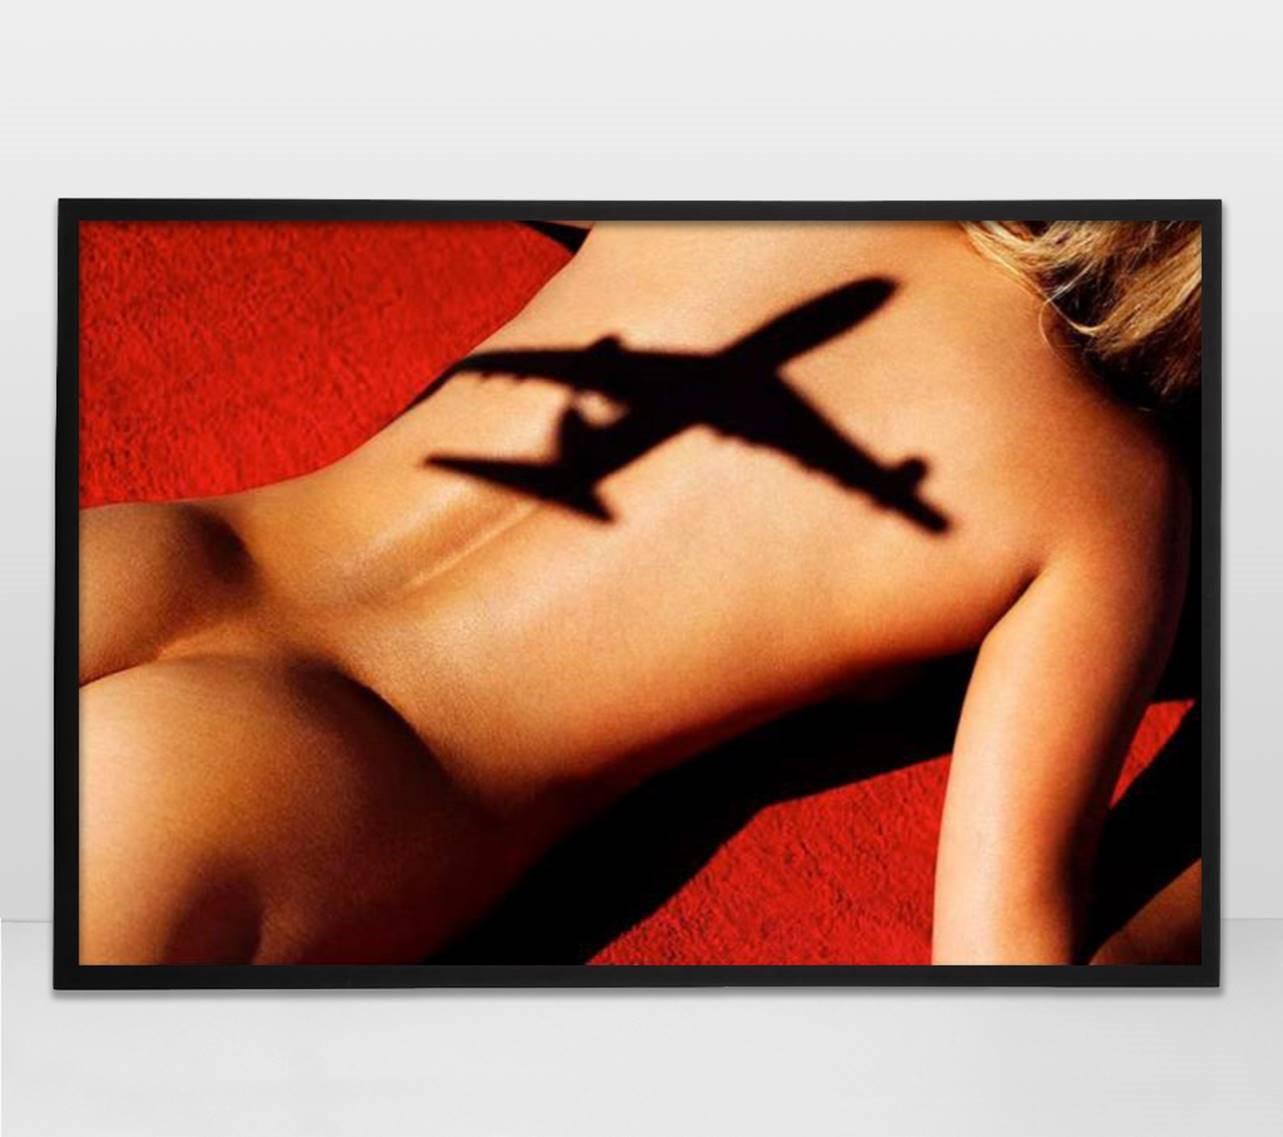 Flight 5 - nude portrait of a woman sunbathing overshadowed by an airplane - Photograph by Tony Kelly